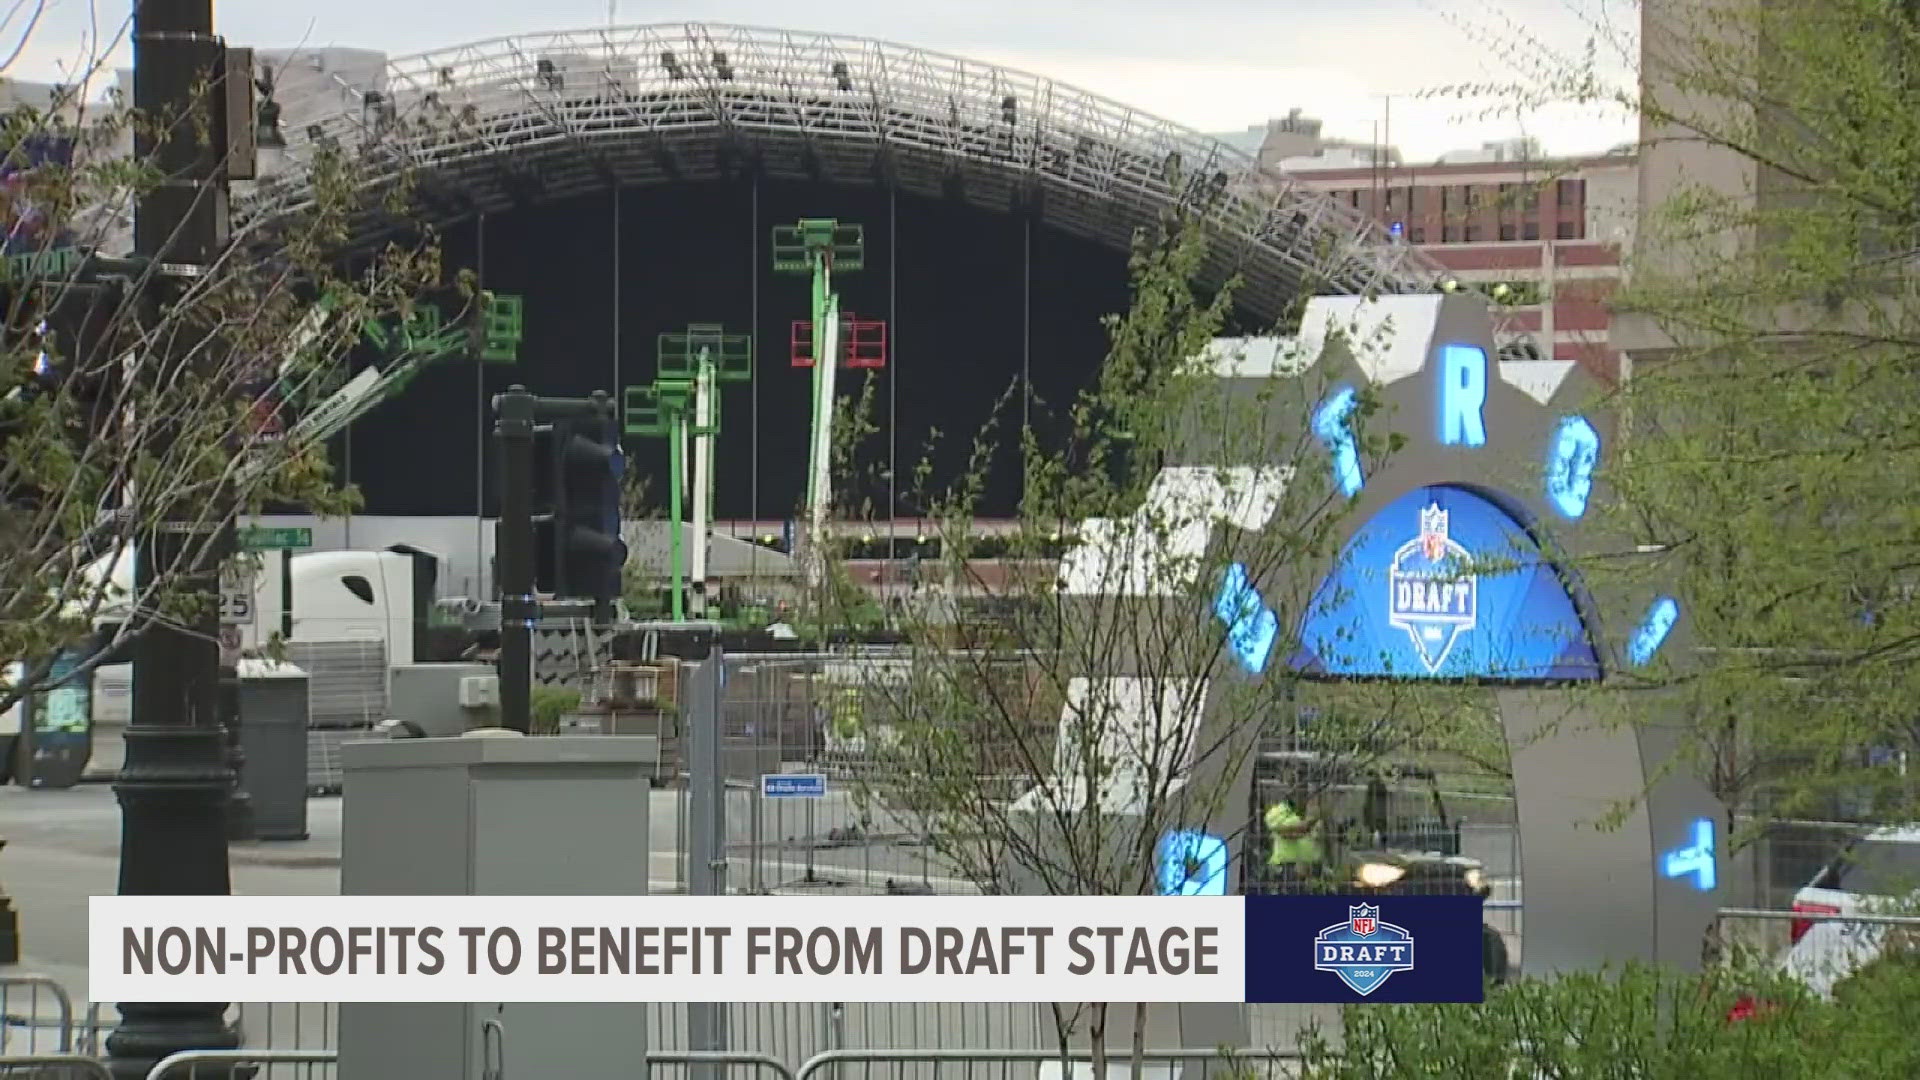 Materials from the NFL Draft stage will be used by nonprofits instead of being taken to a landfill.